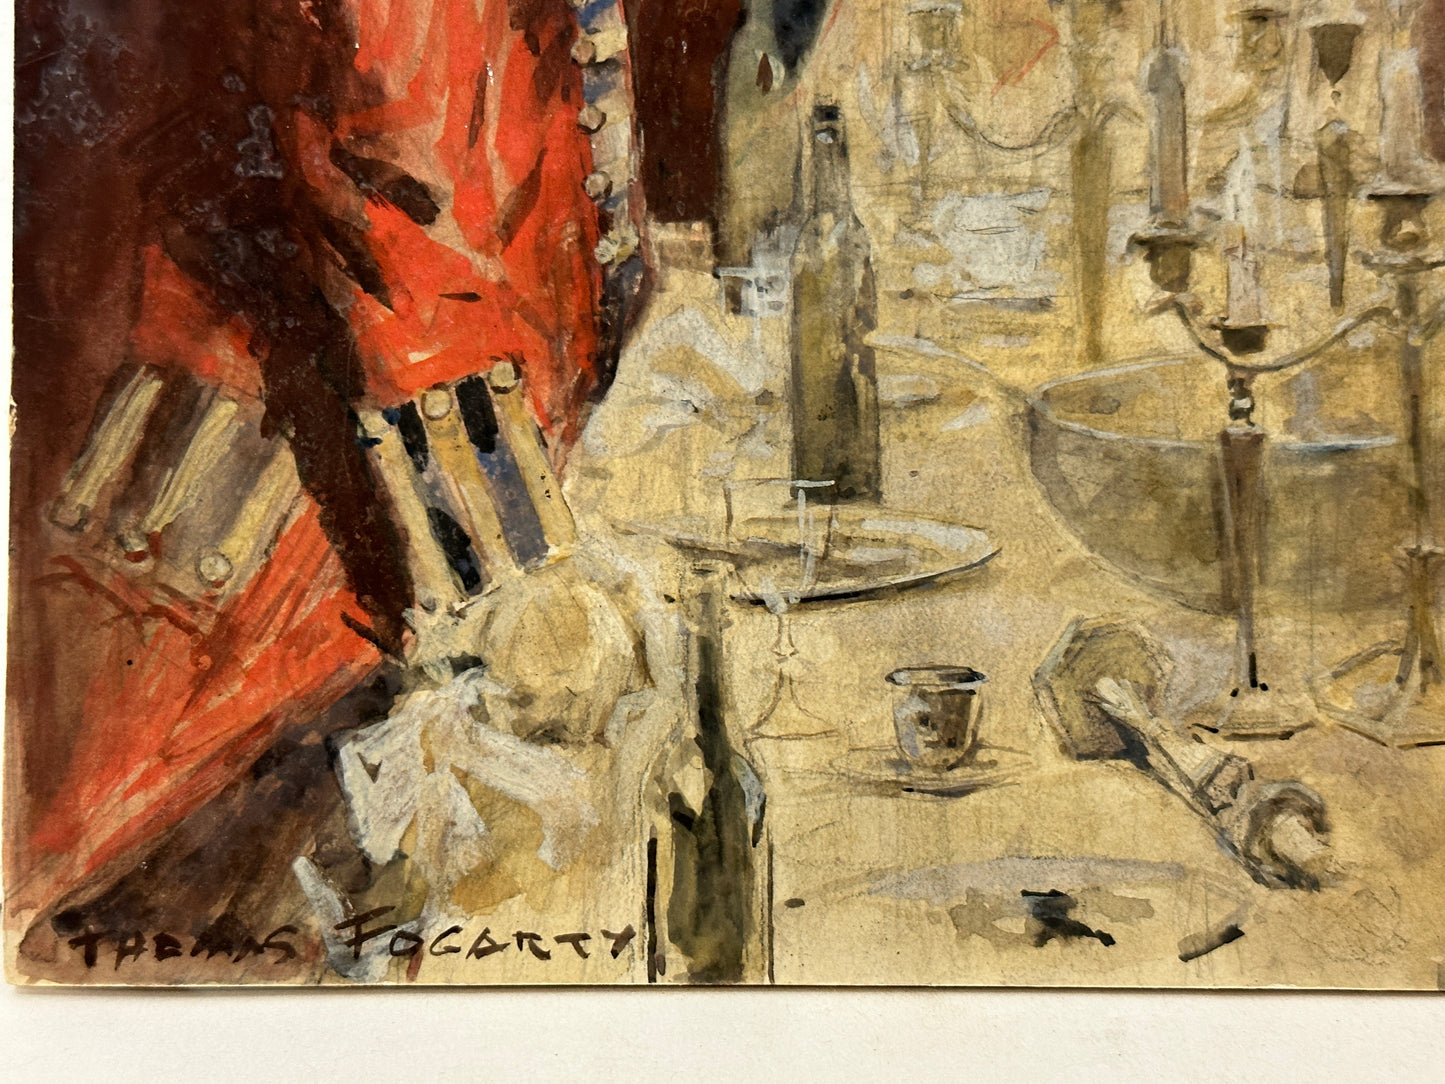 Thomas Fogarty Watercolor: Men in red uniform at dinner table